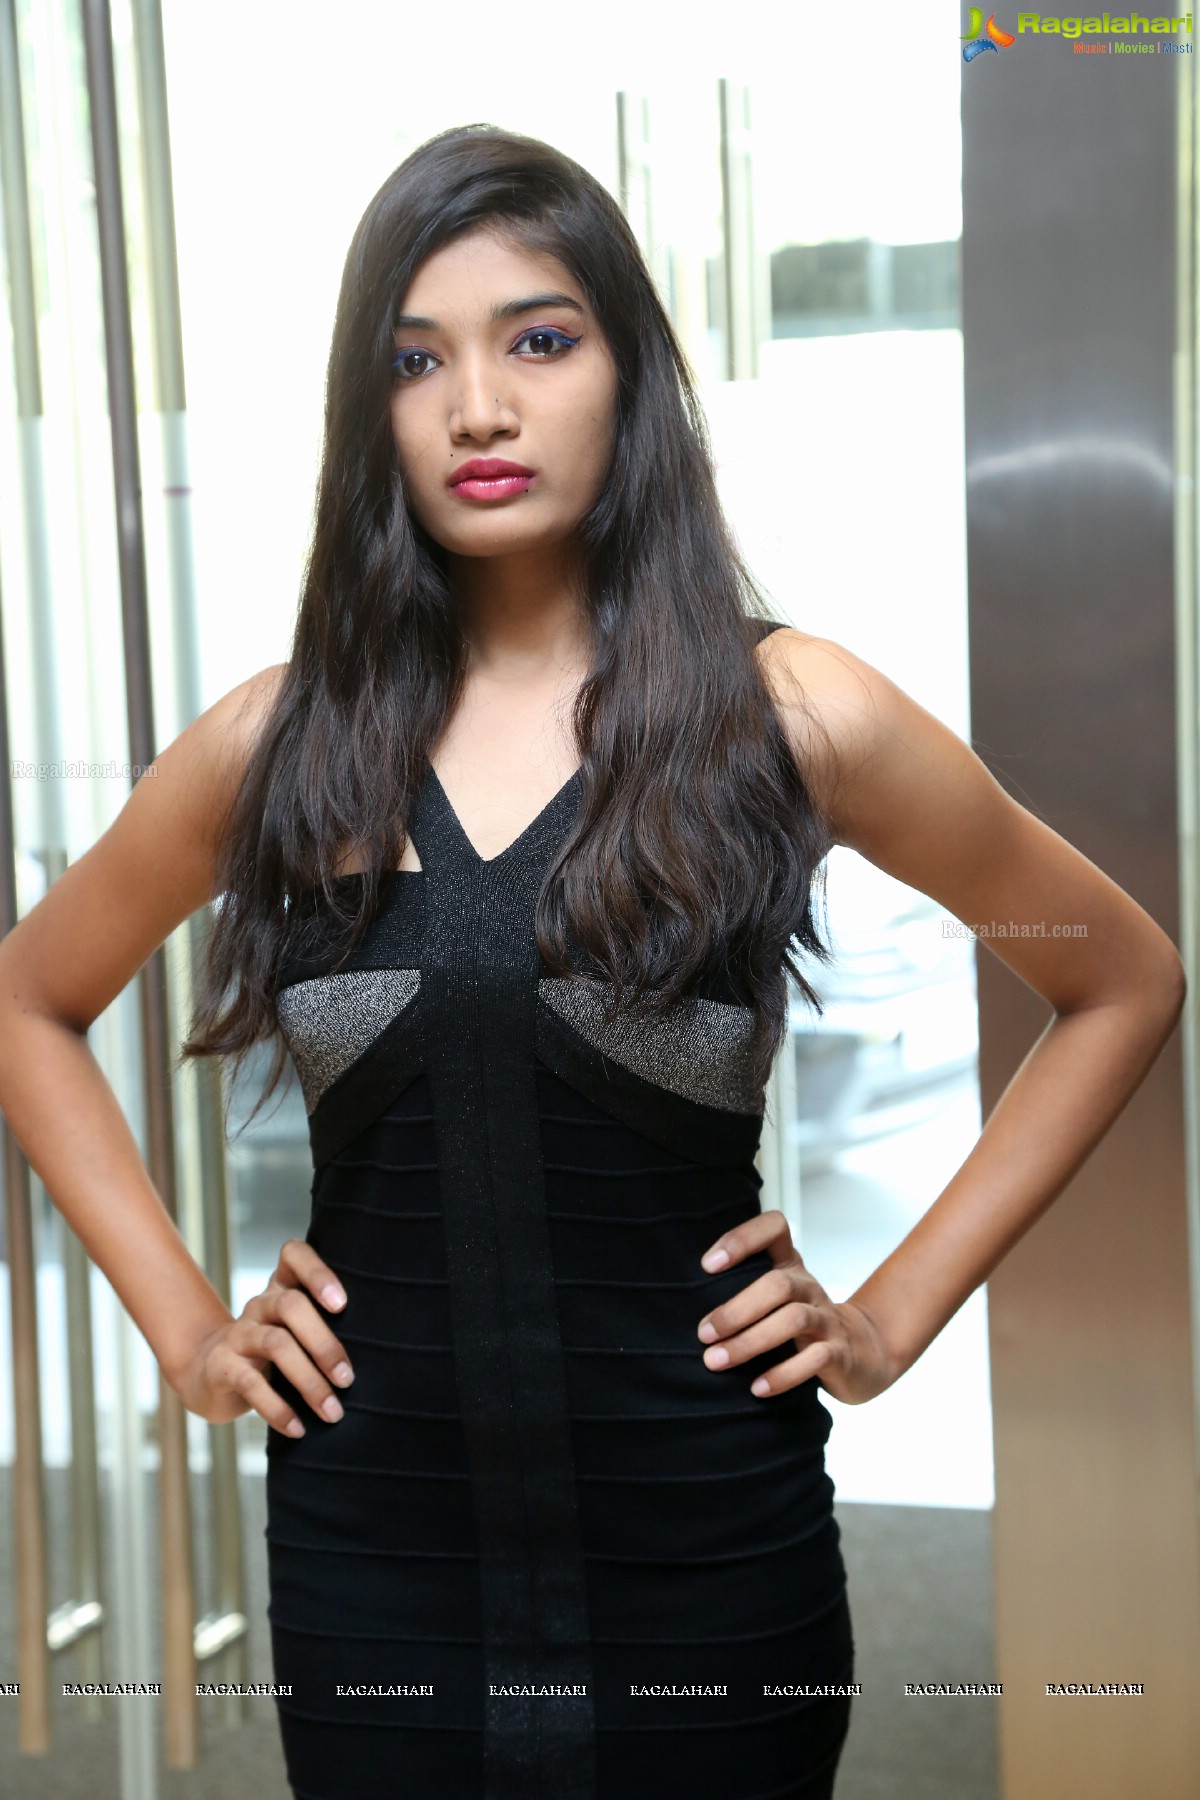 Miss South India 17th Edition at Mercure Hotel, Hyderabad